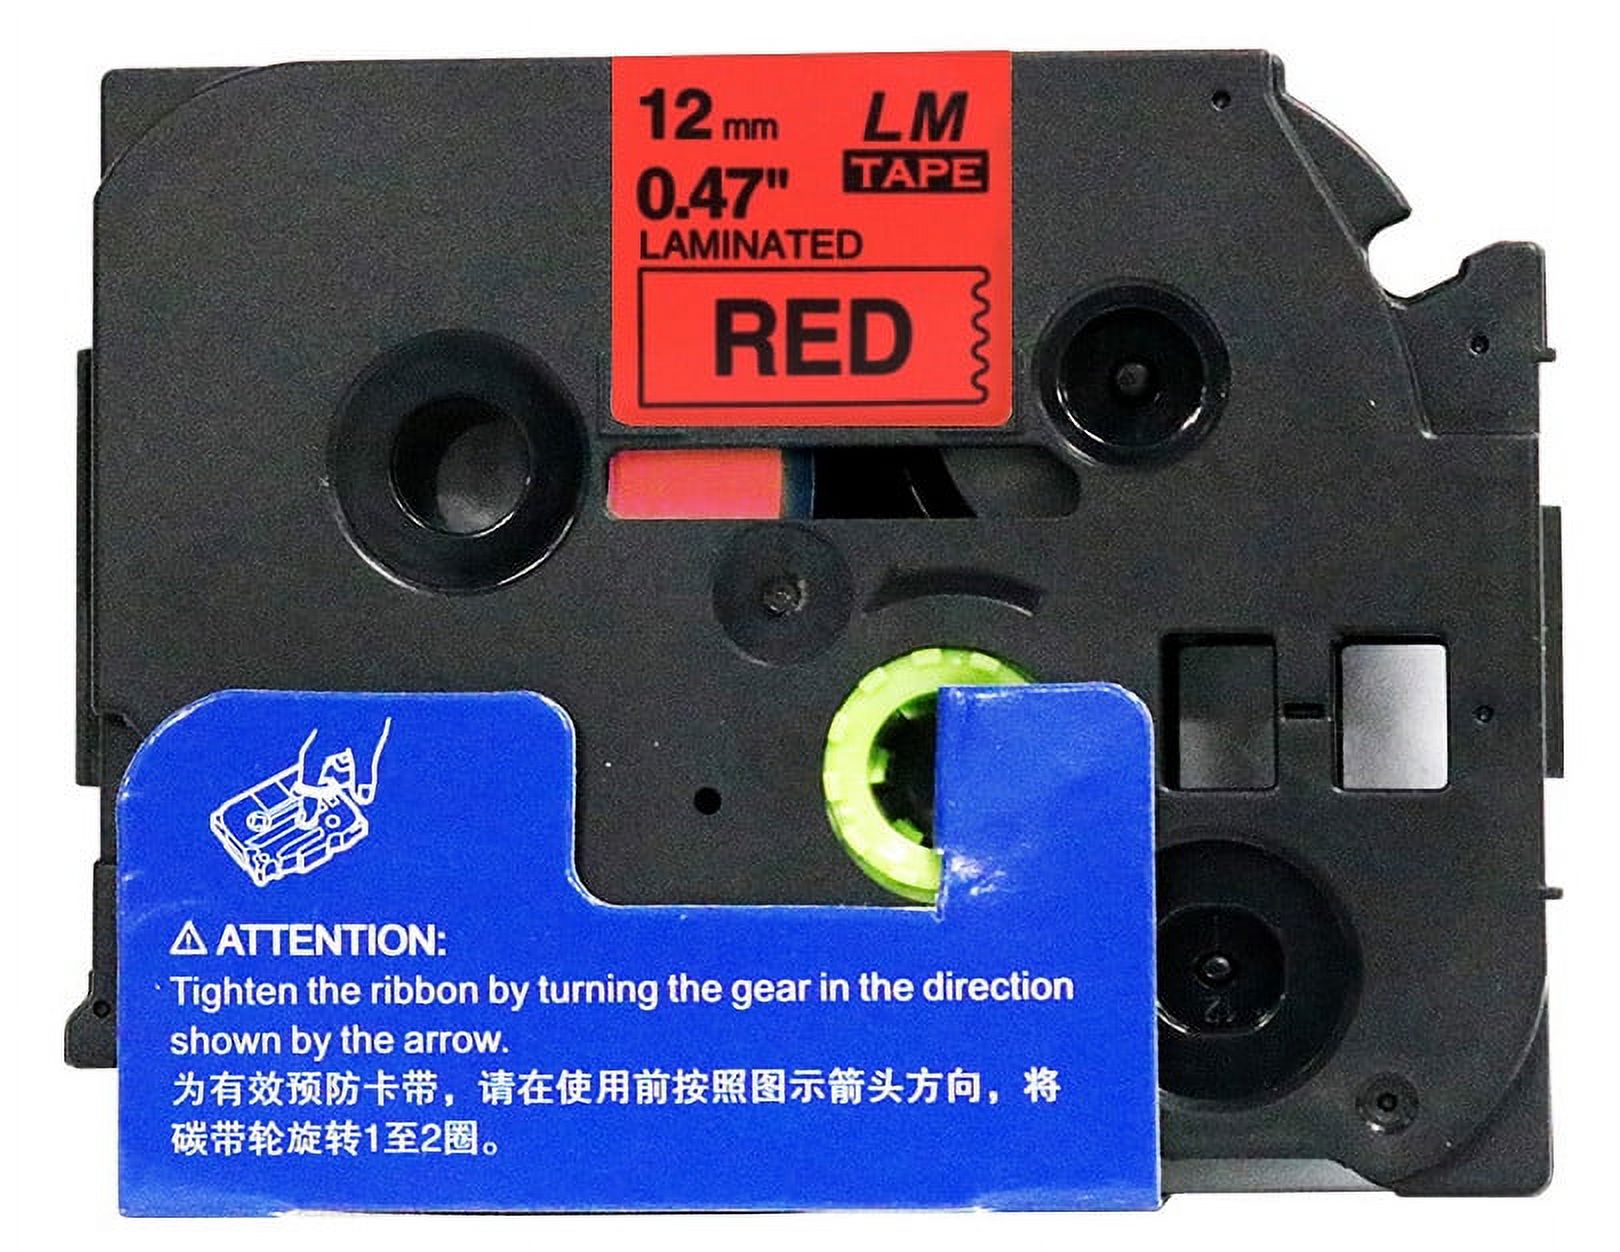 LM Tapes - 6/Pack Premium 1/2" Black Print on Red Label Compatible with TZe-431 Tape TZ-431 comes with Free Tape Color/Size Guide for easy reordering. - image 2 of 2